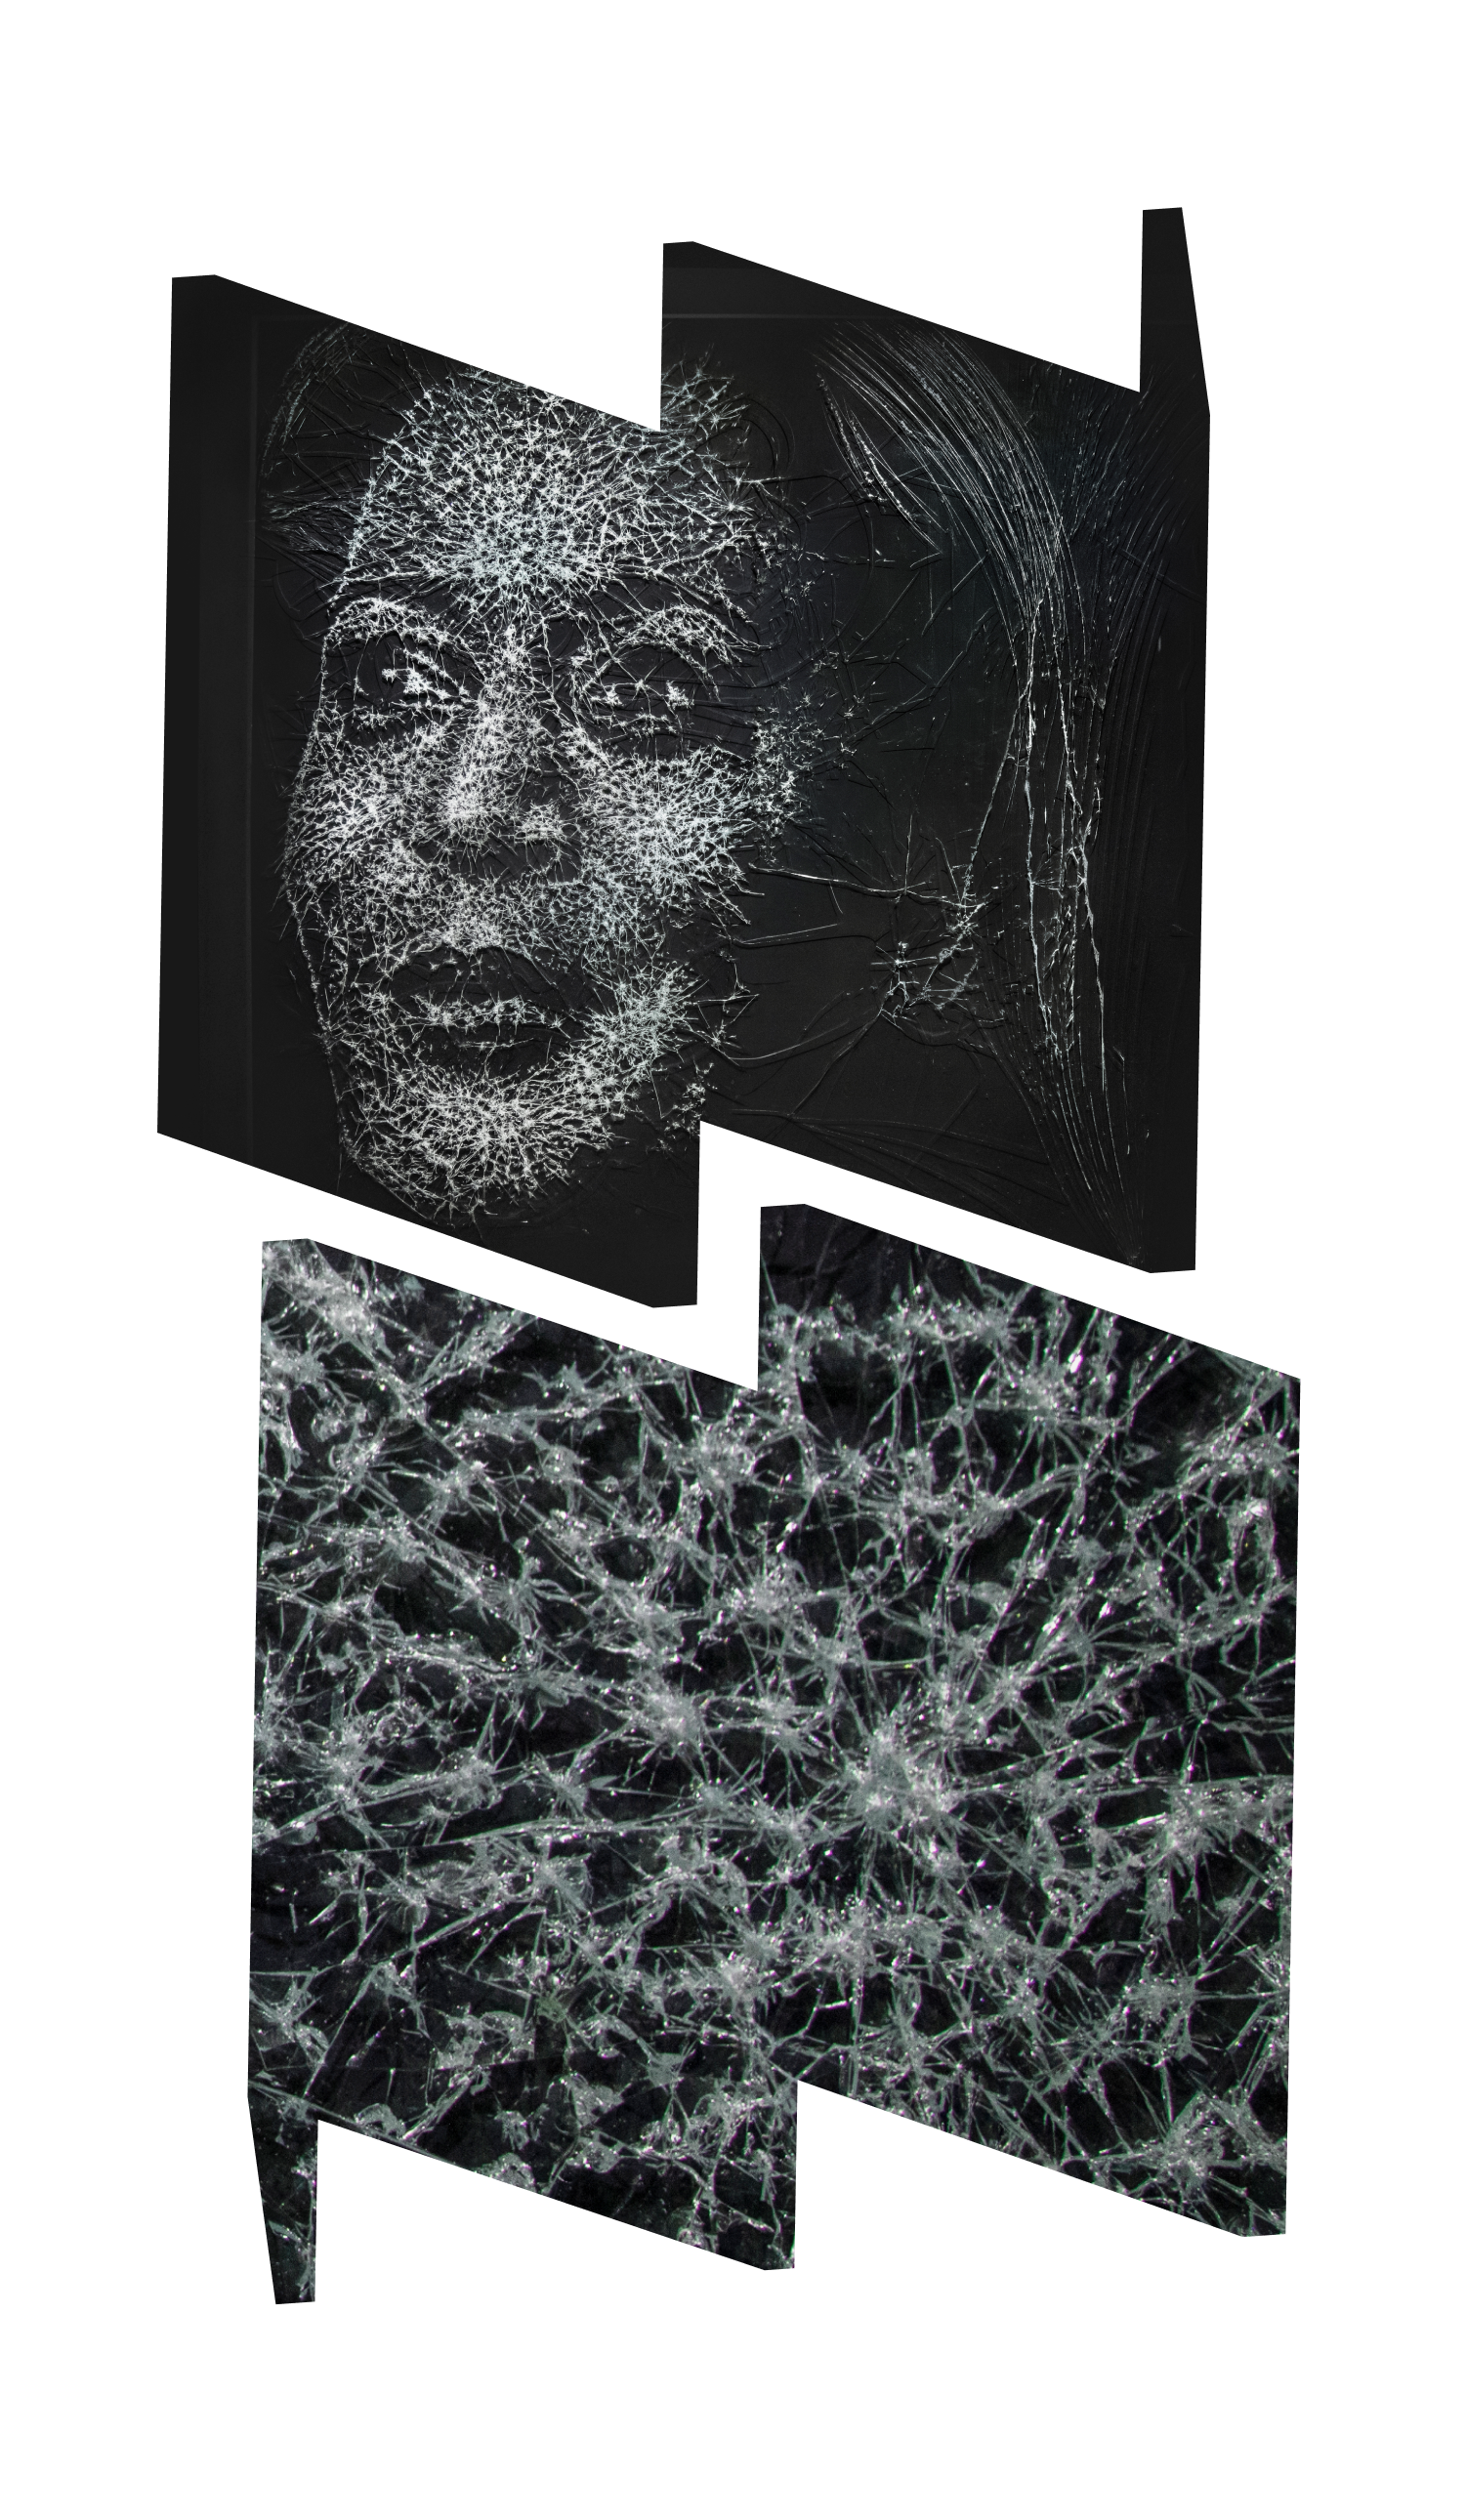 Top "W" frame with portrait of Vice President Kamala Harris made of shattered glass; bottom "M" frame with close-up of shattered glass.